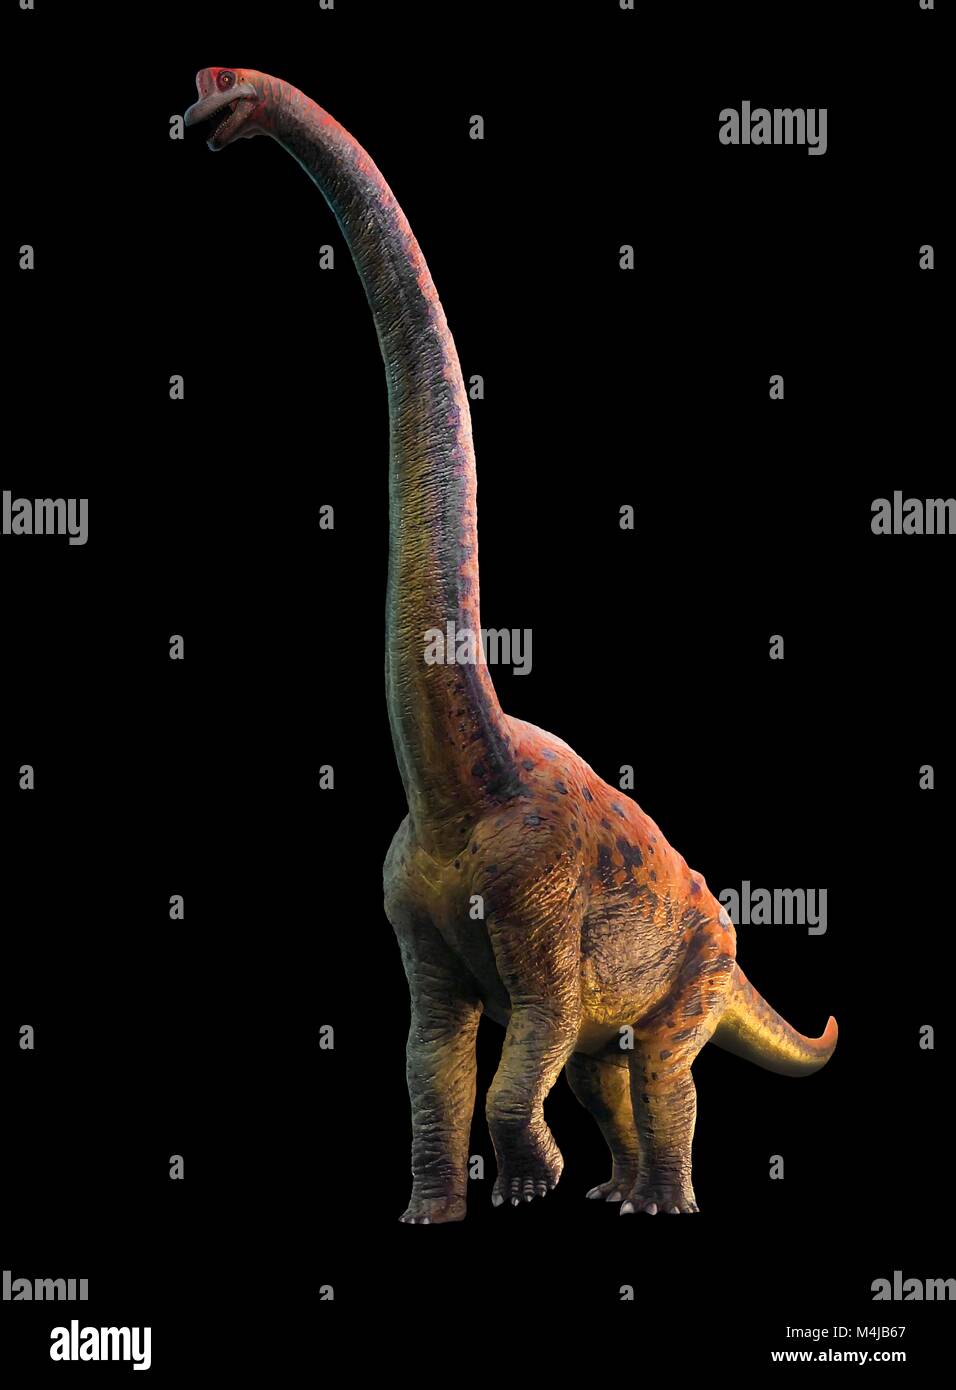 Illustration of a giraffatitan dinosaur. Giraffatitan was previously thought to be a species of brachiosaurus (B. brancai) but is now thought to belong to a separate genus. These animals were sauropods, four-legged, plant-eating dinosaurs from the Jurassic period. They reached a maximum length of about 26 metres and weighed up to 40 tonnes. The skeletons of Brachiosaurus and Giraffatitan, although coming from different continents (America and Africa, respectively) look almost identical to the untrained eye, so this picture could represent either animal. Stock Photo